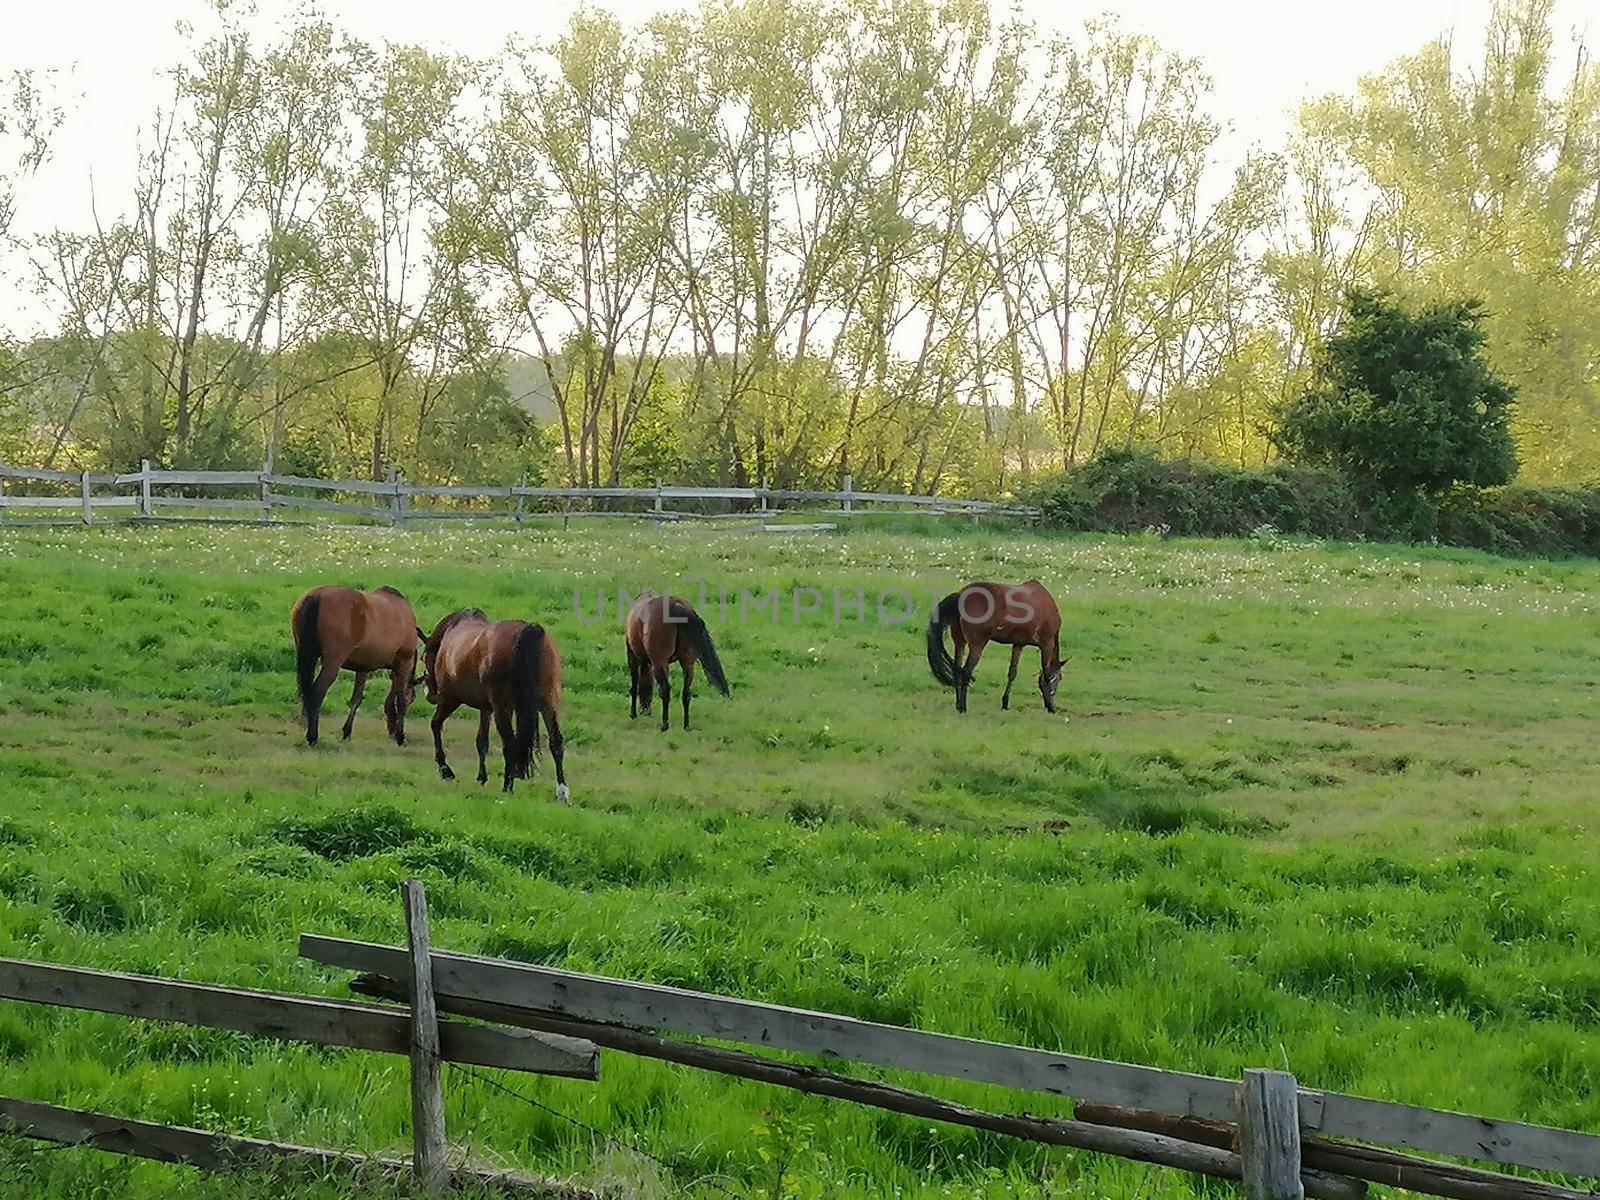 Horses in a grassy field on a bright and sunny day in Germany.